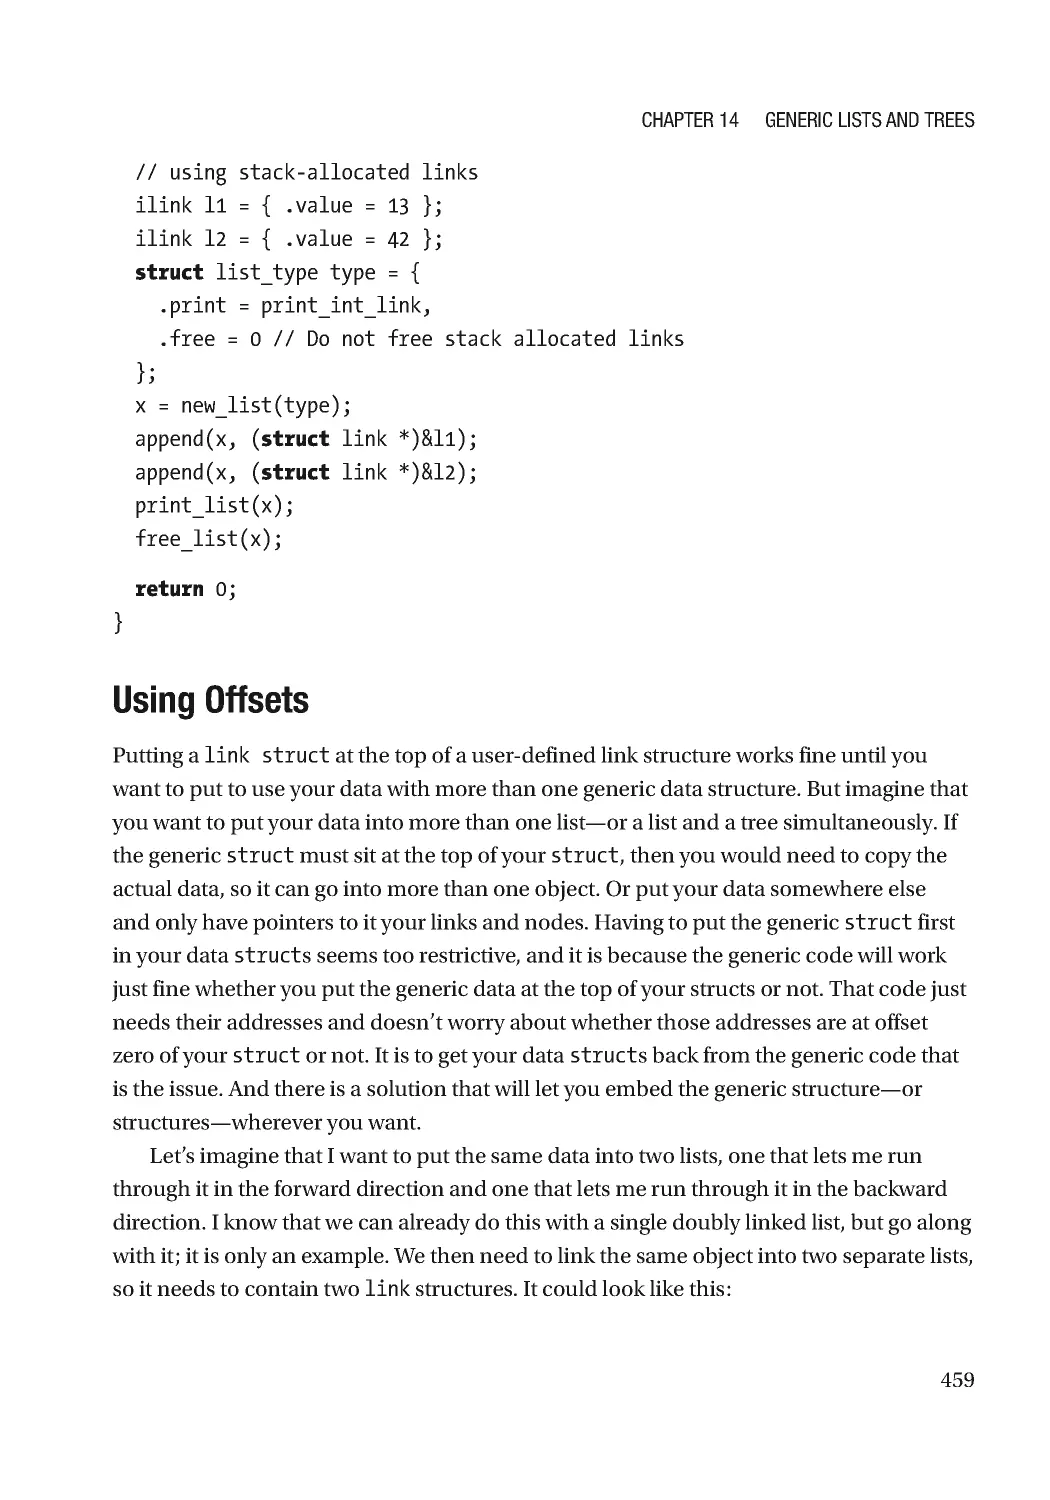 Using Offsets